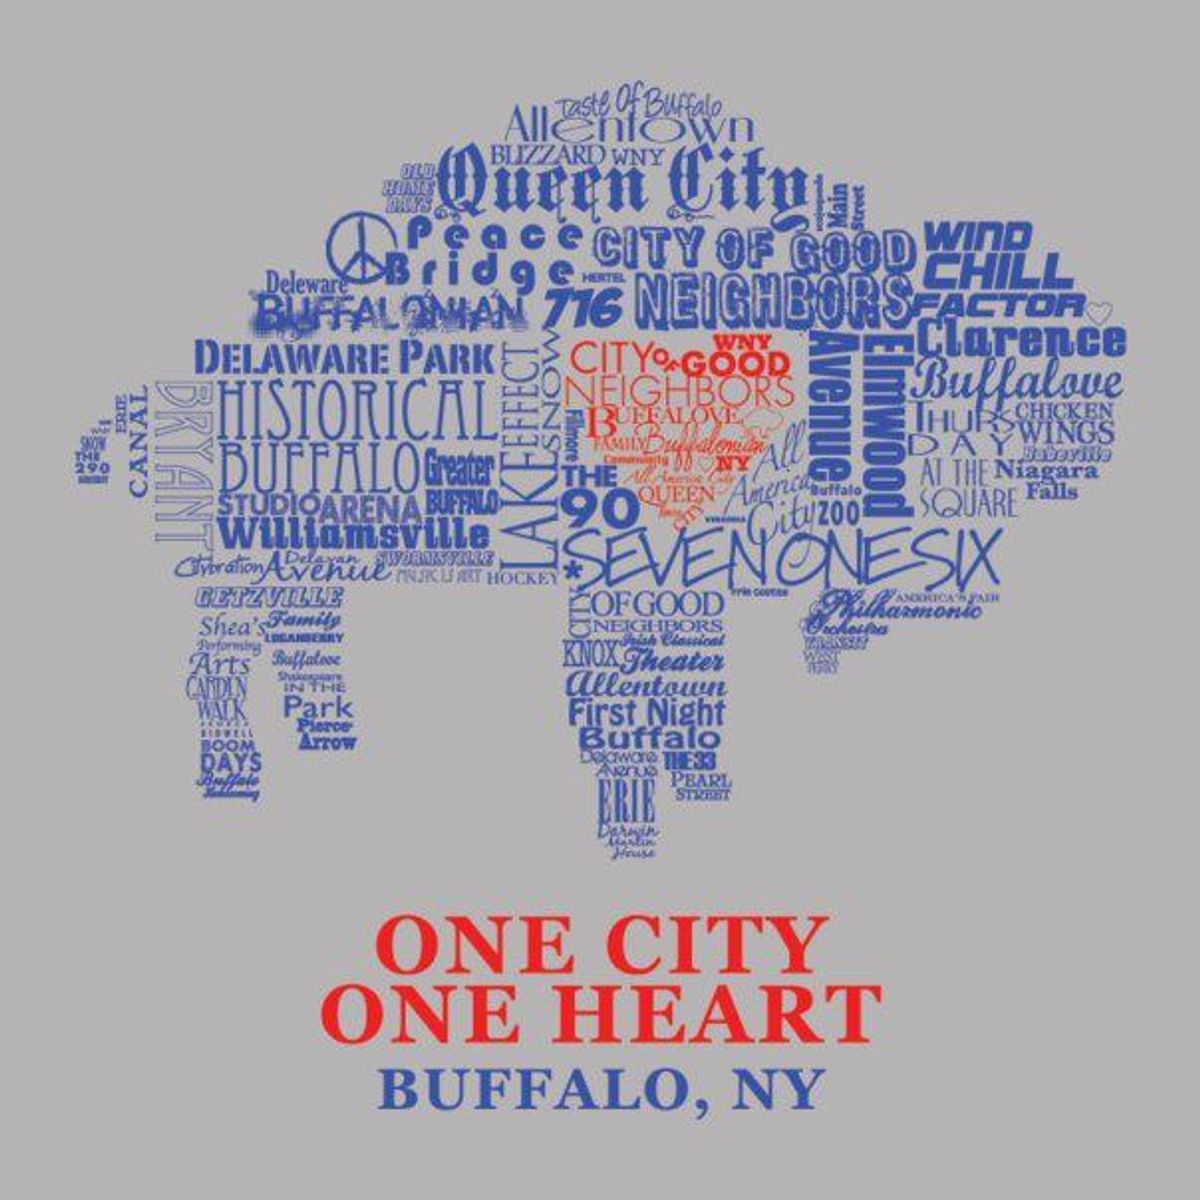 A Thank You Letter To Buffalo